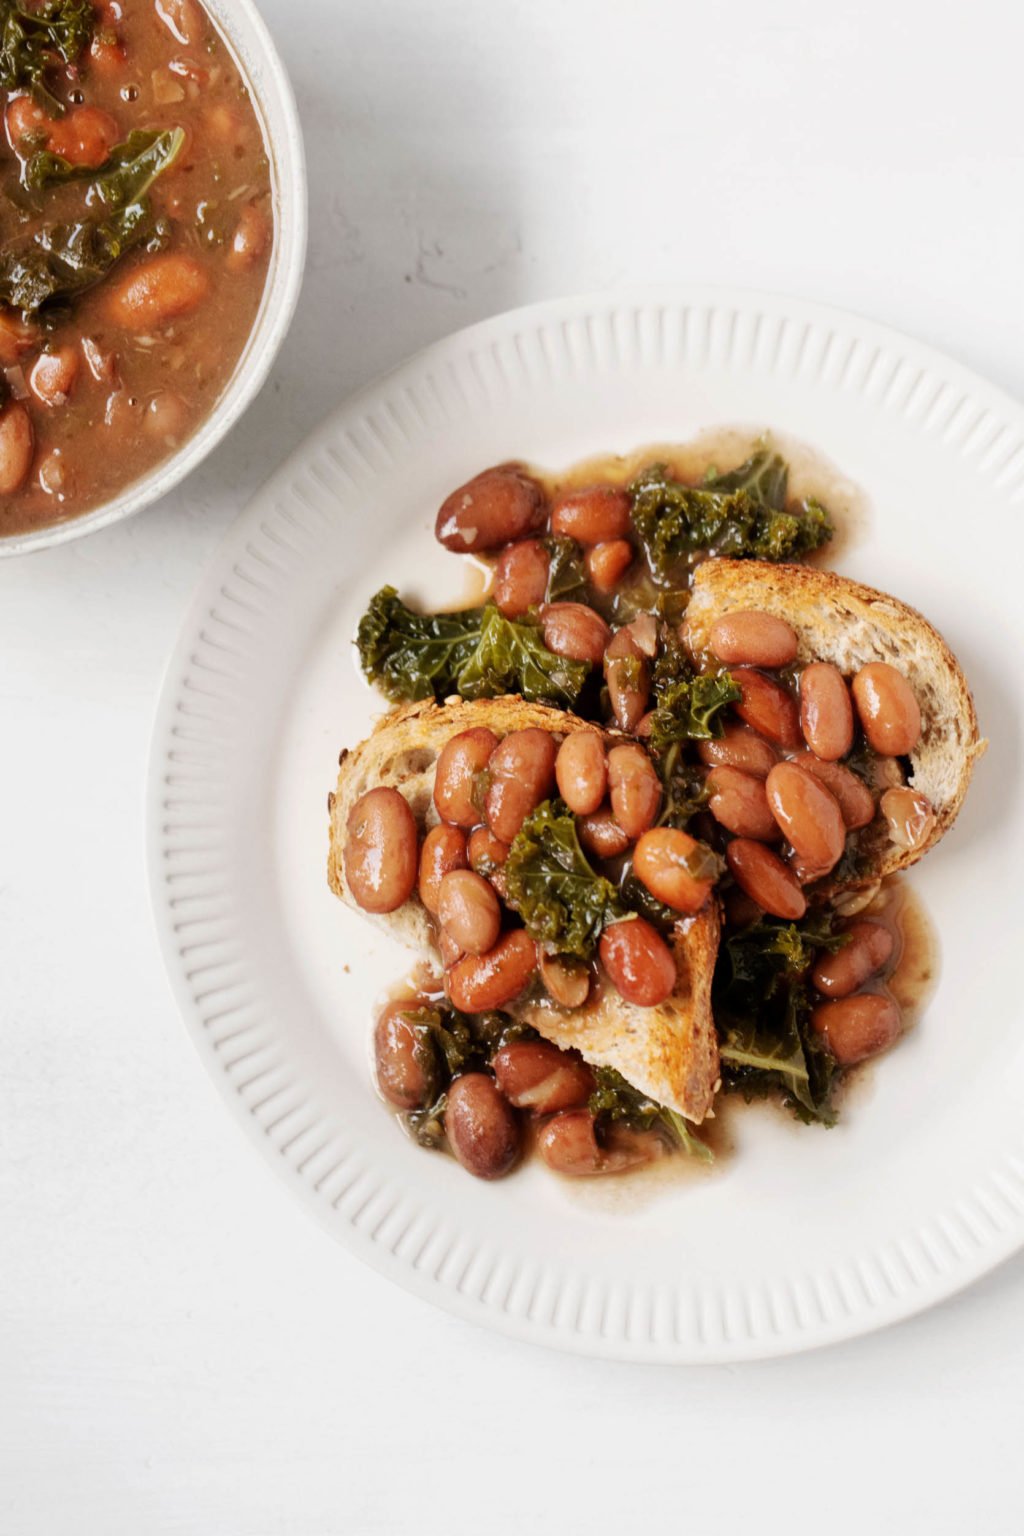 A white, ceramic, fluted plate has been covered with a piece of toast and some braised beans & kale.